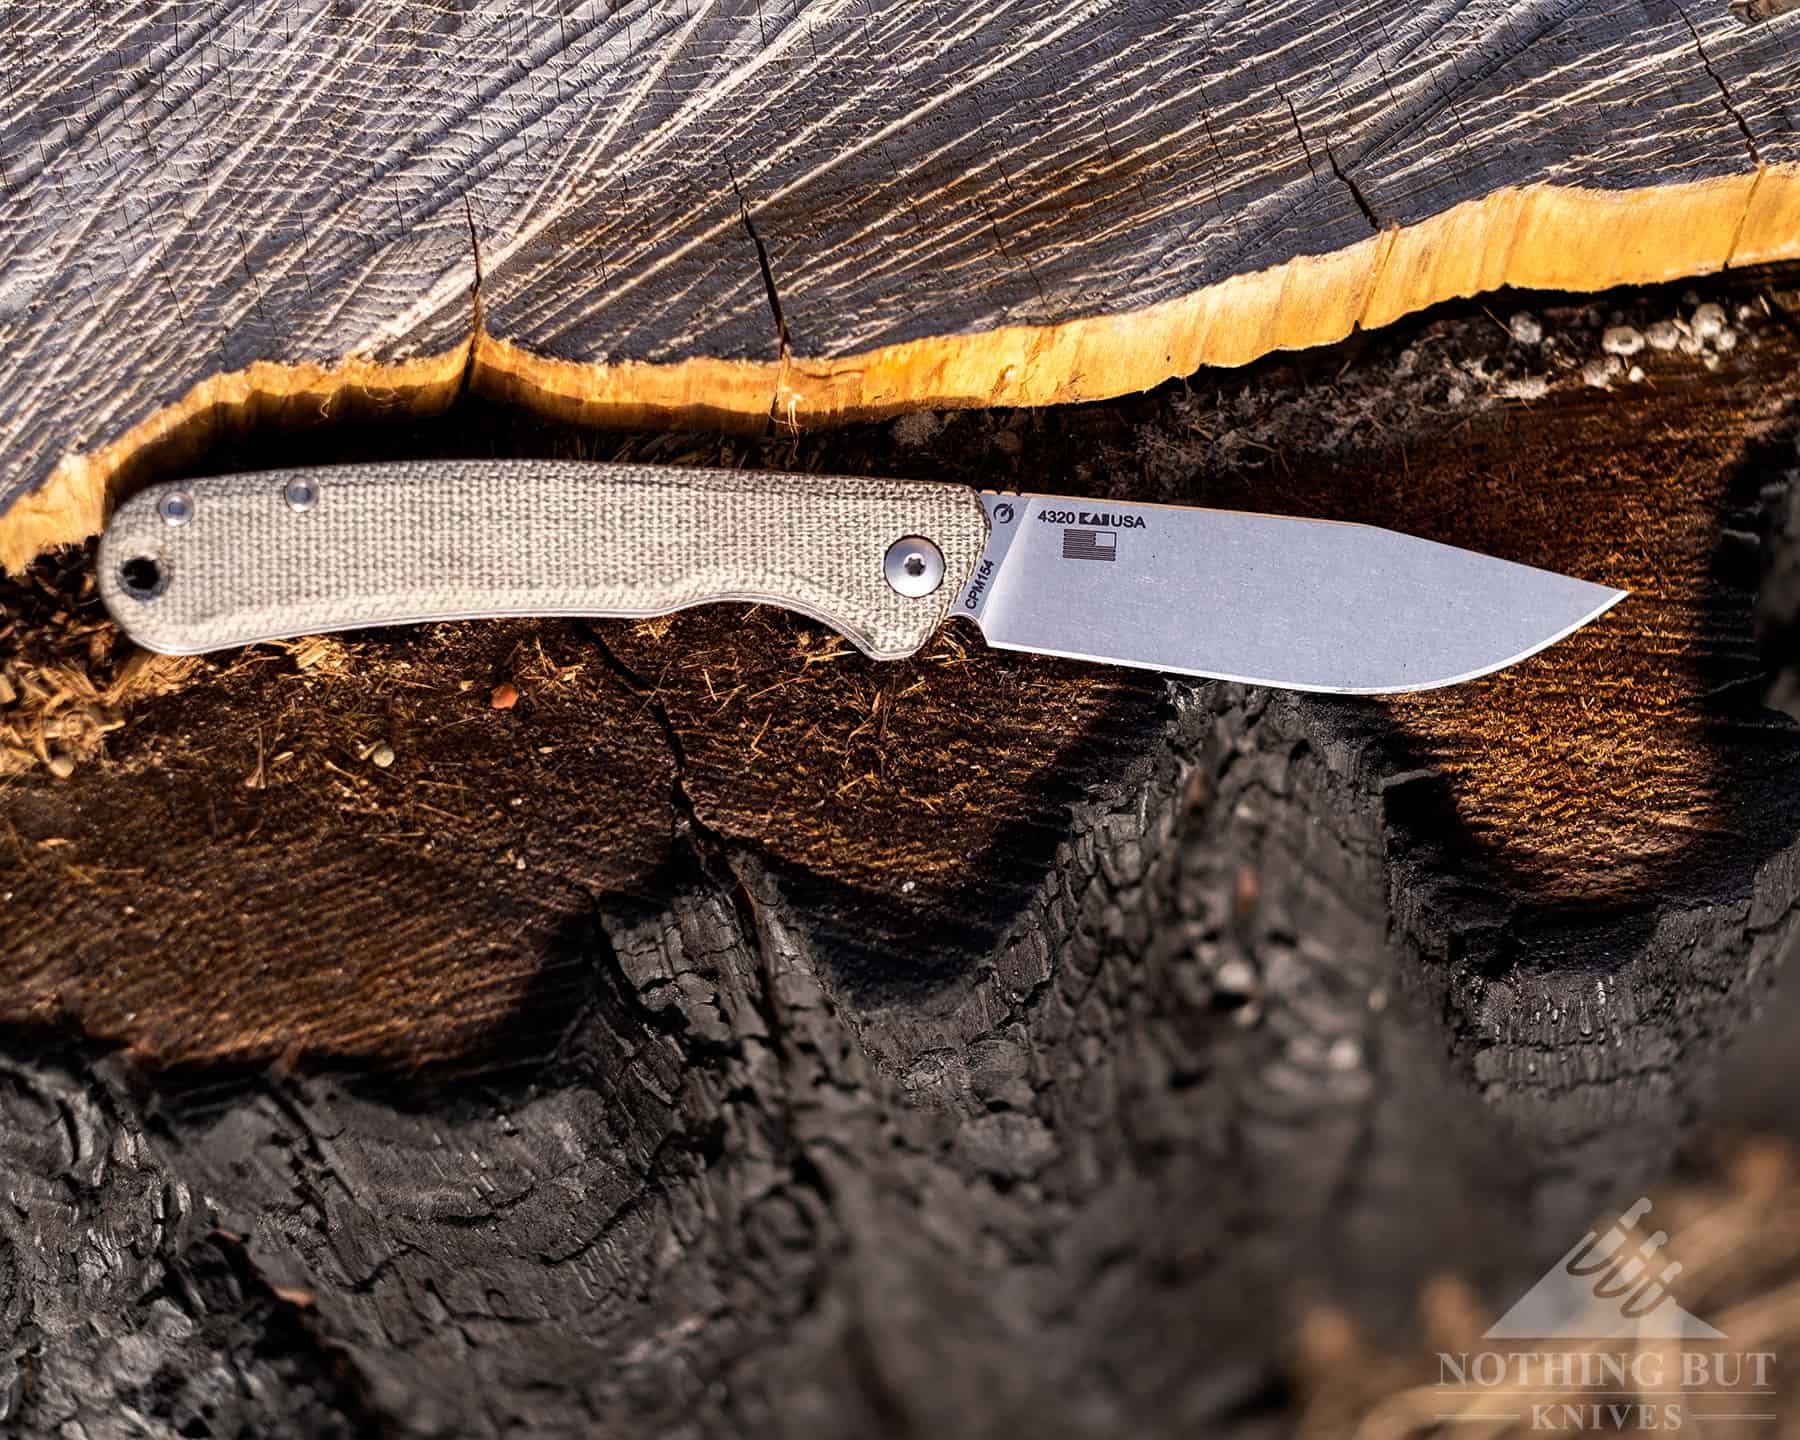 This profile shot of the Kershaw Federalist pocket knife shows the branding on the blade. 